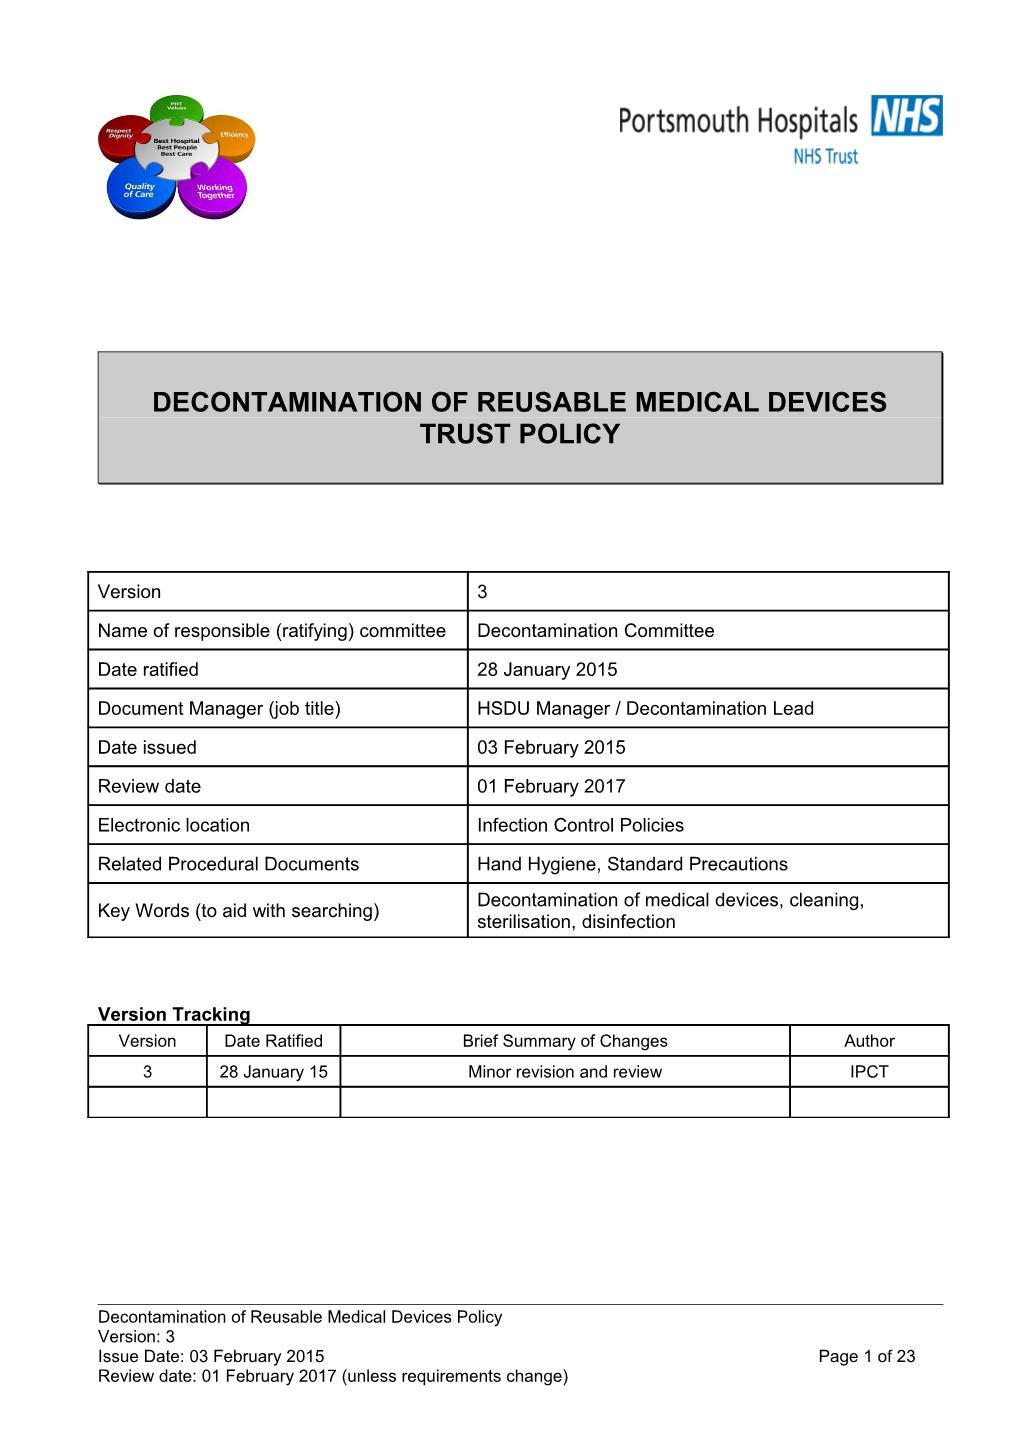 Decontamination of Reusable Medical Devices